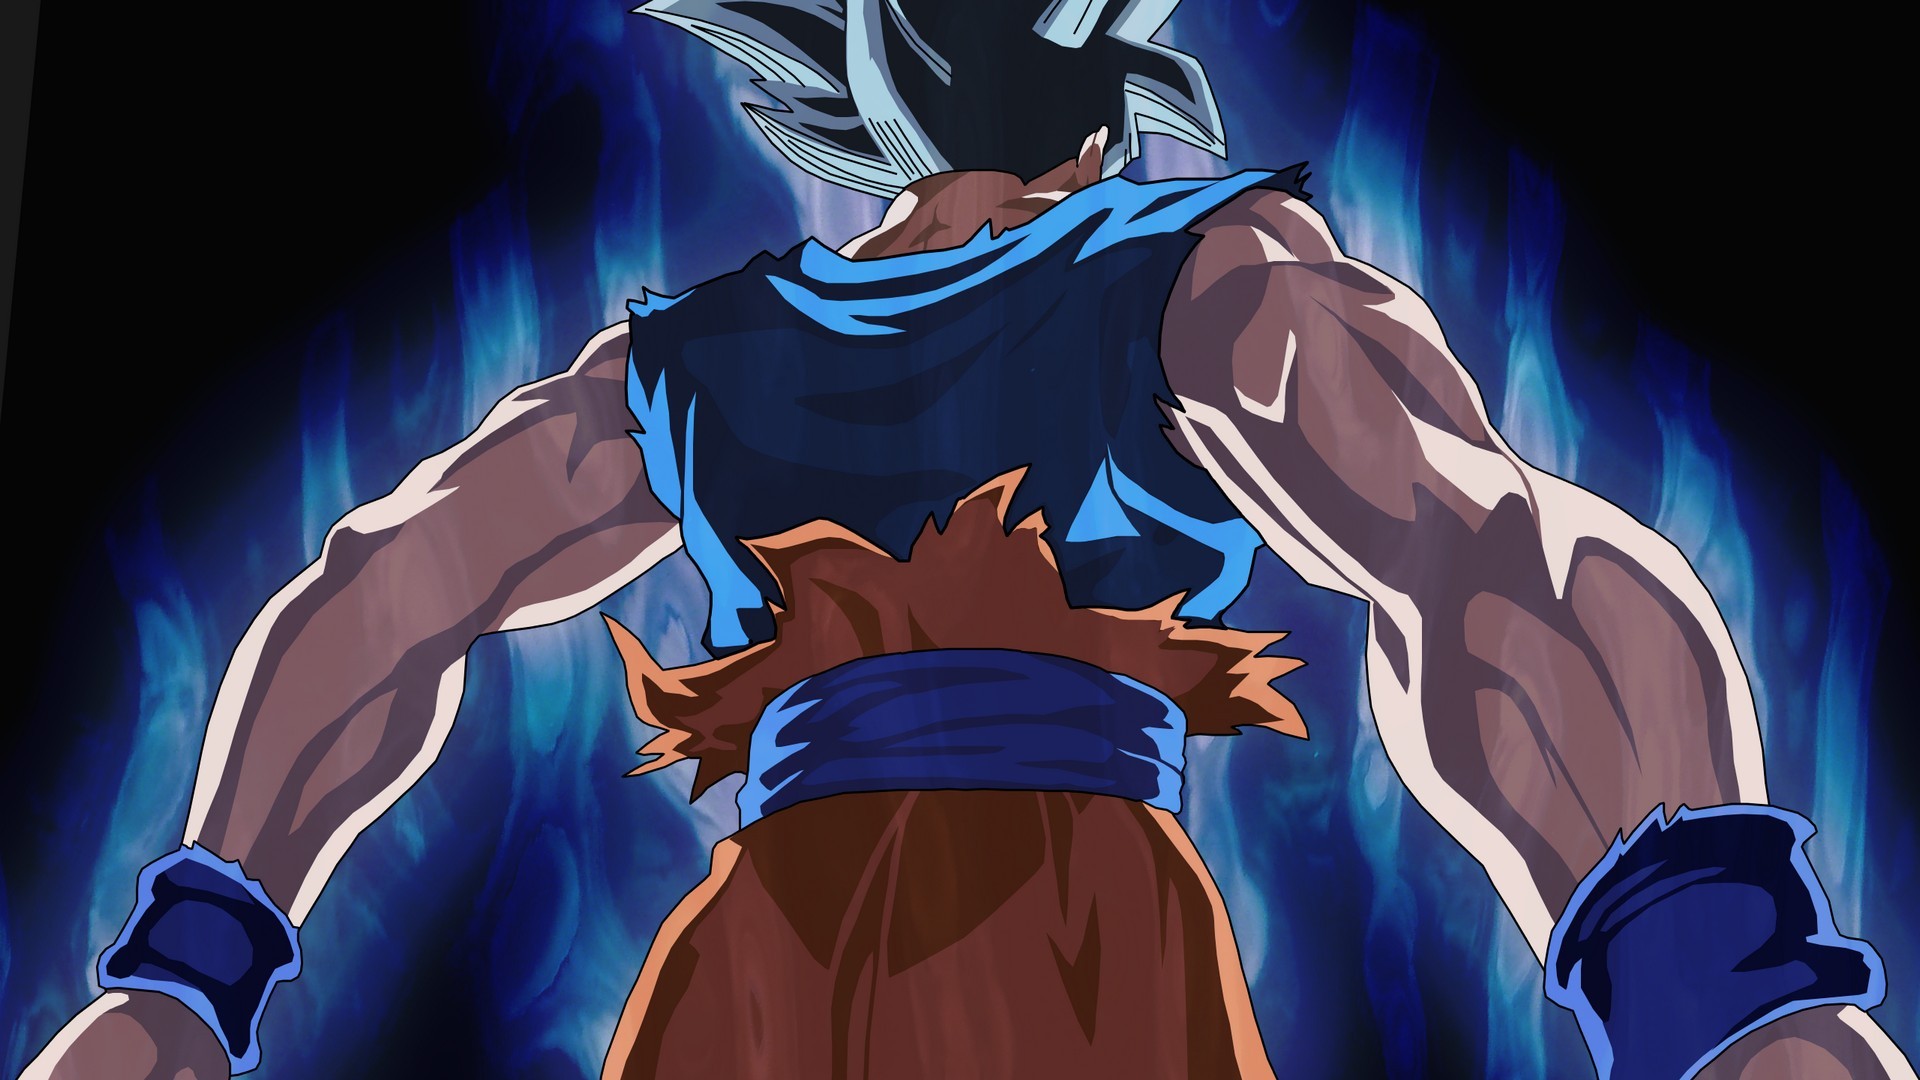 Goku Images Wallpaper with image resolution 1920x1080 pixel. You can use this wallpaper as background for your desktop Computer Screensavers, Android or iPhone smartphones